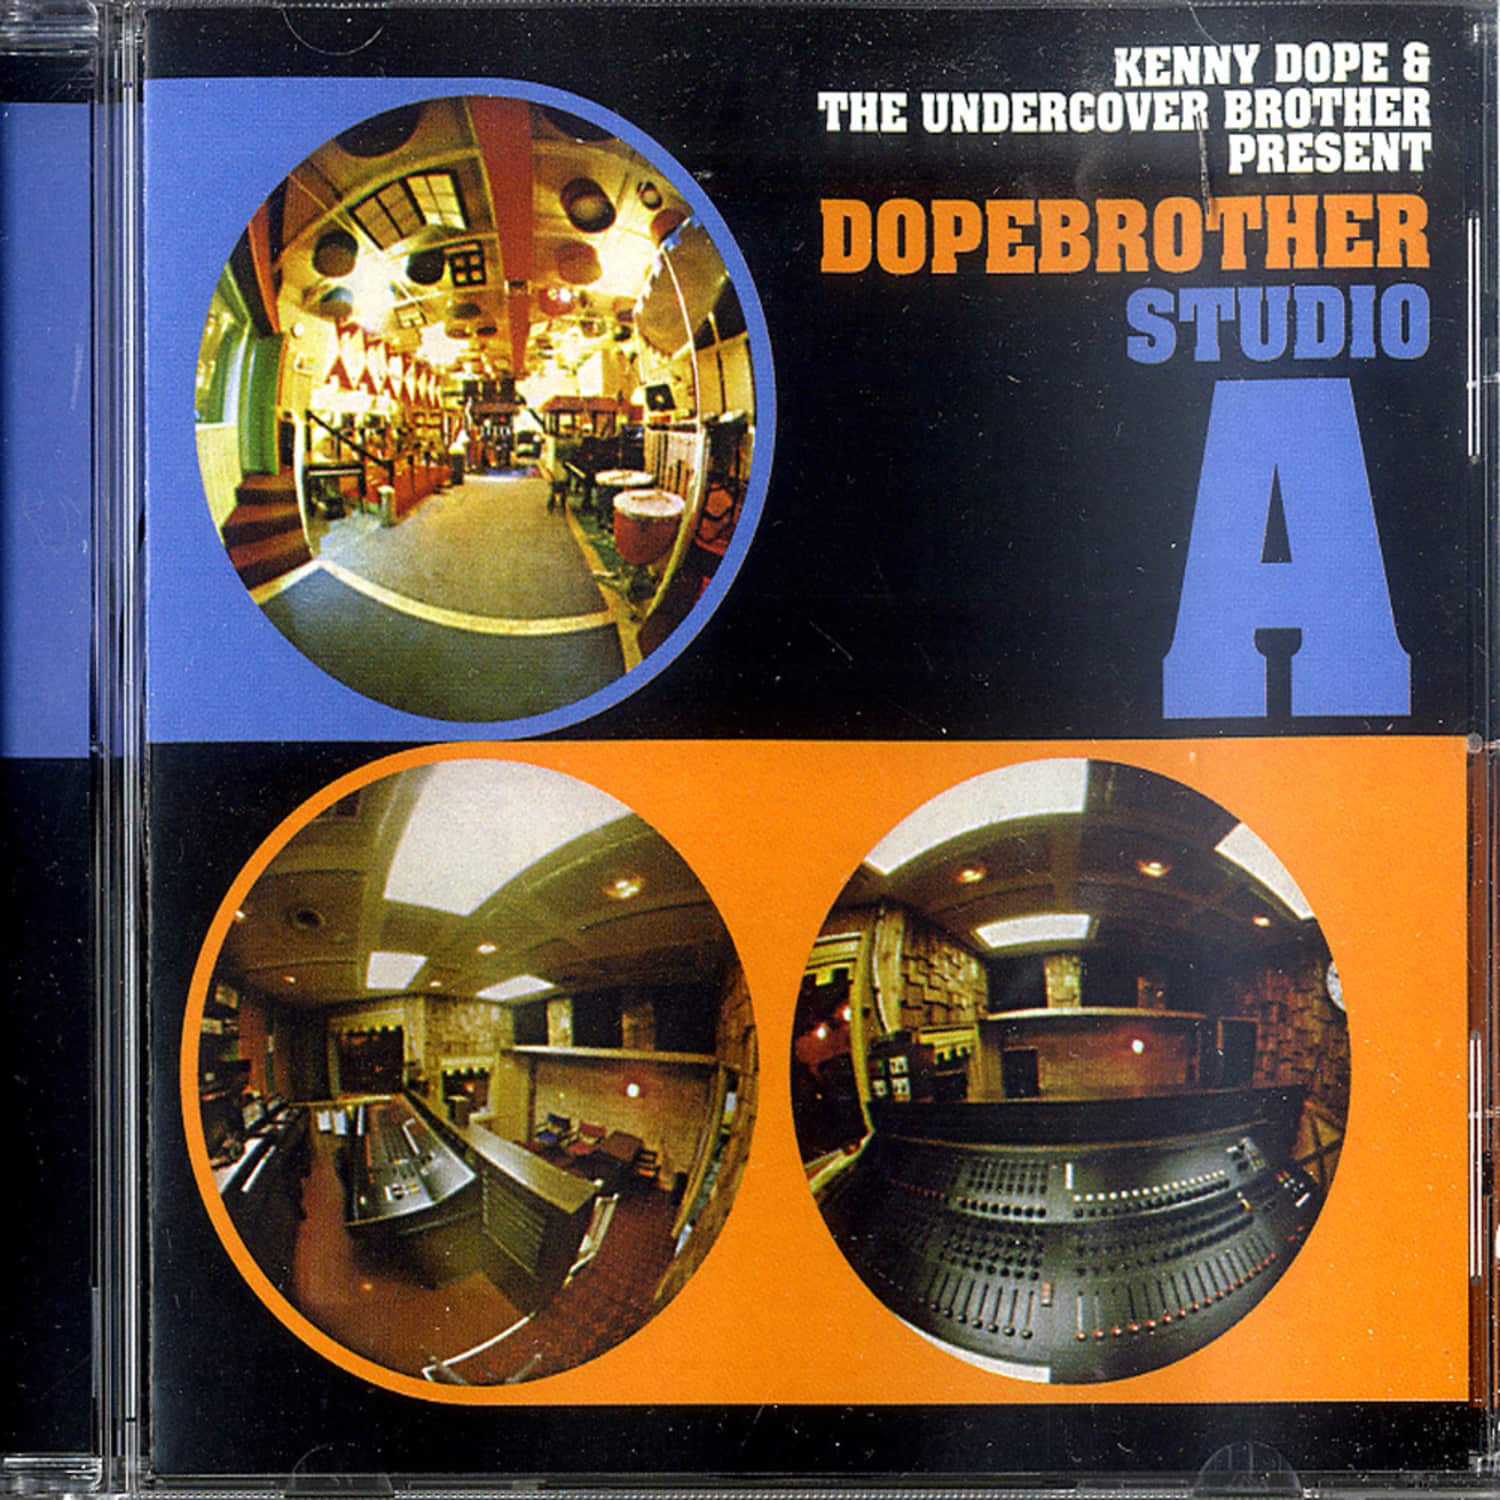 Kenny Dope & The Undercover Brother - PRESENT DOPEBROTHER STUDIO A 